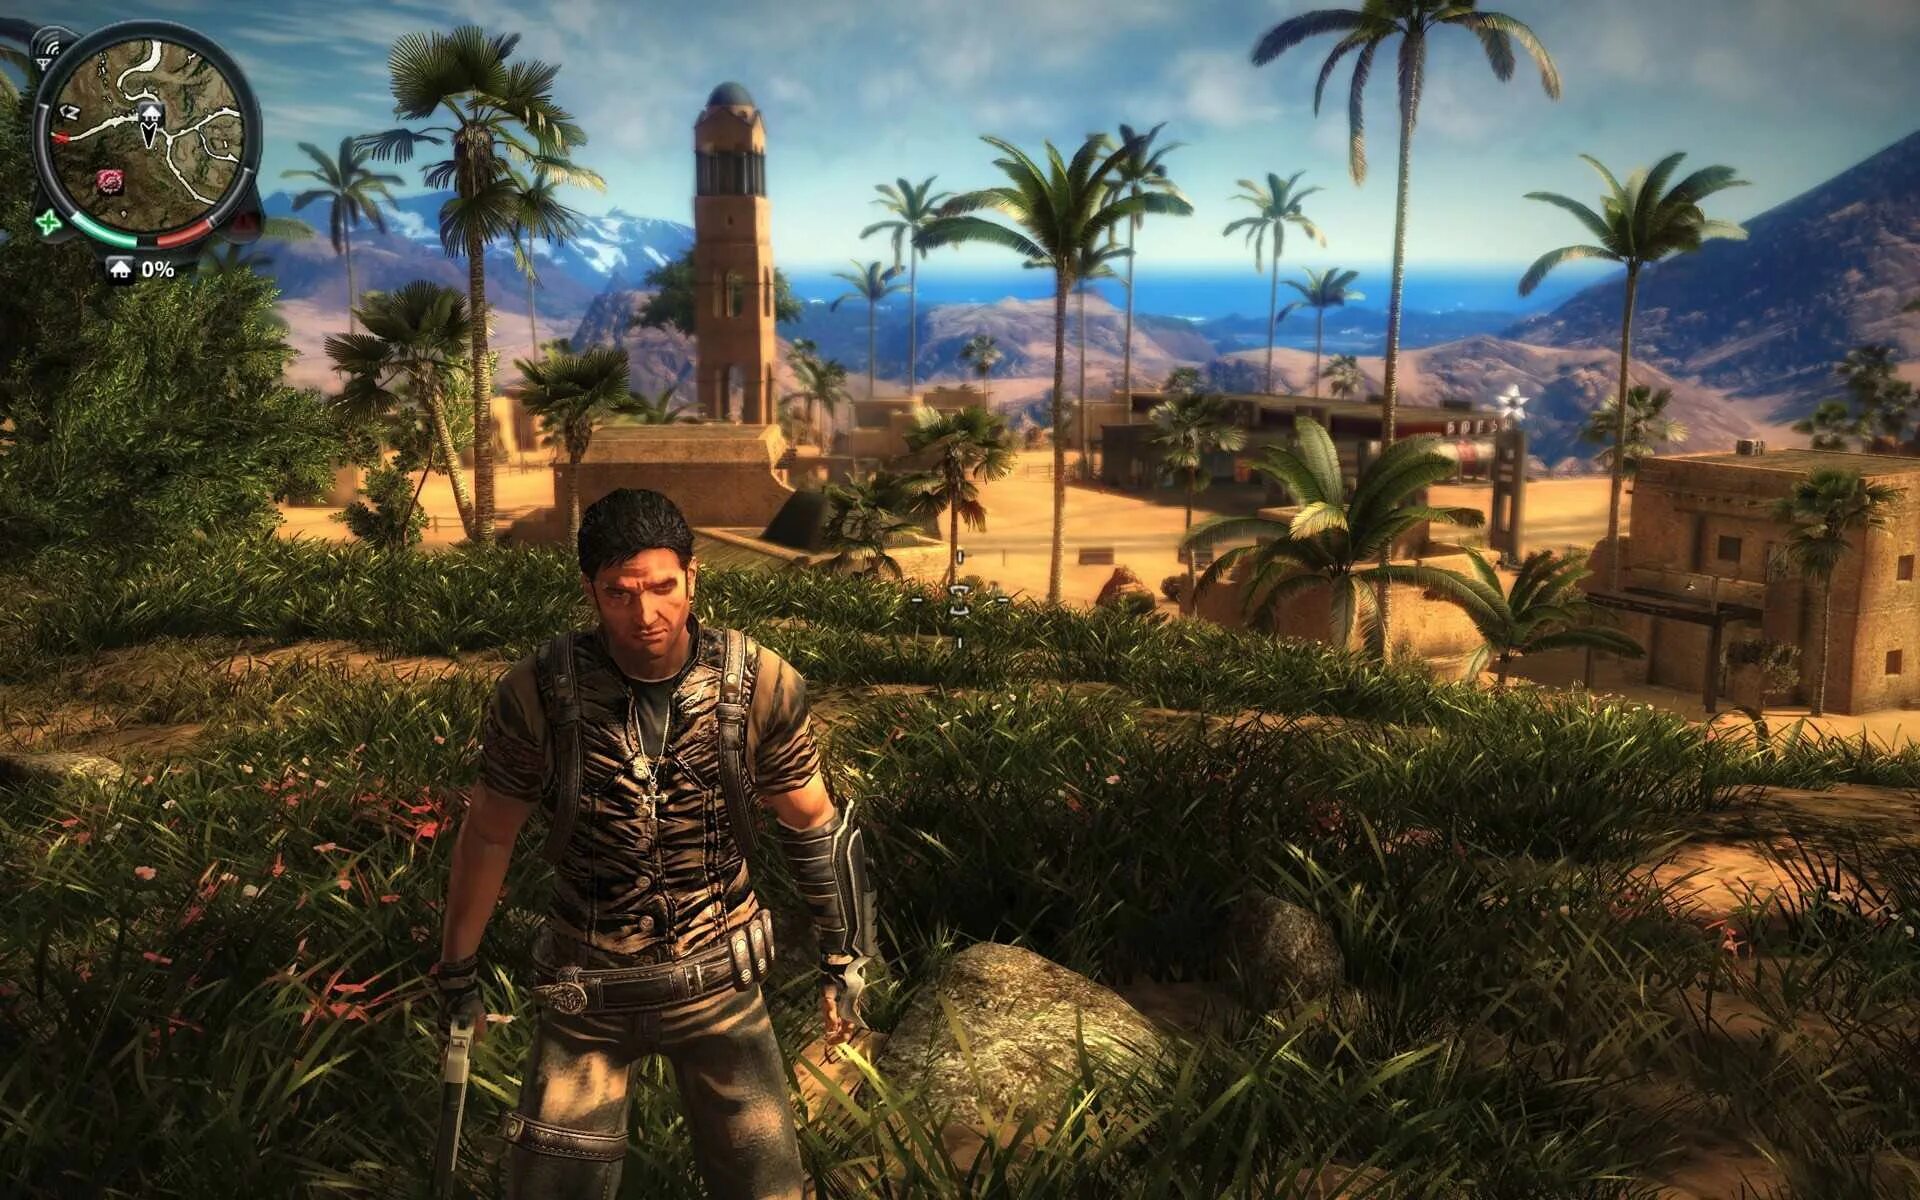 Just one game. Just cause 2. Just cause (игра). Сальвадор Мендоза just cause. Just cause 2 Скорпион.